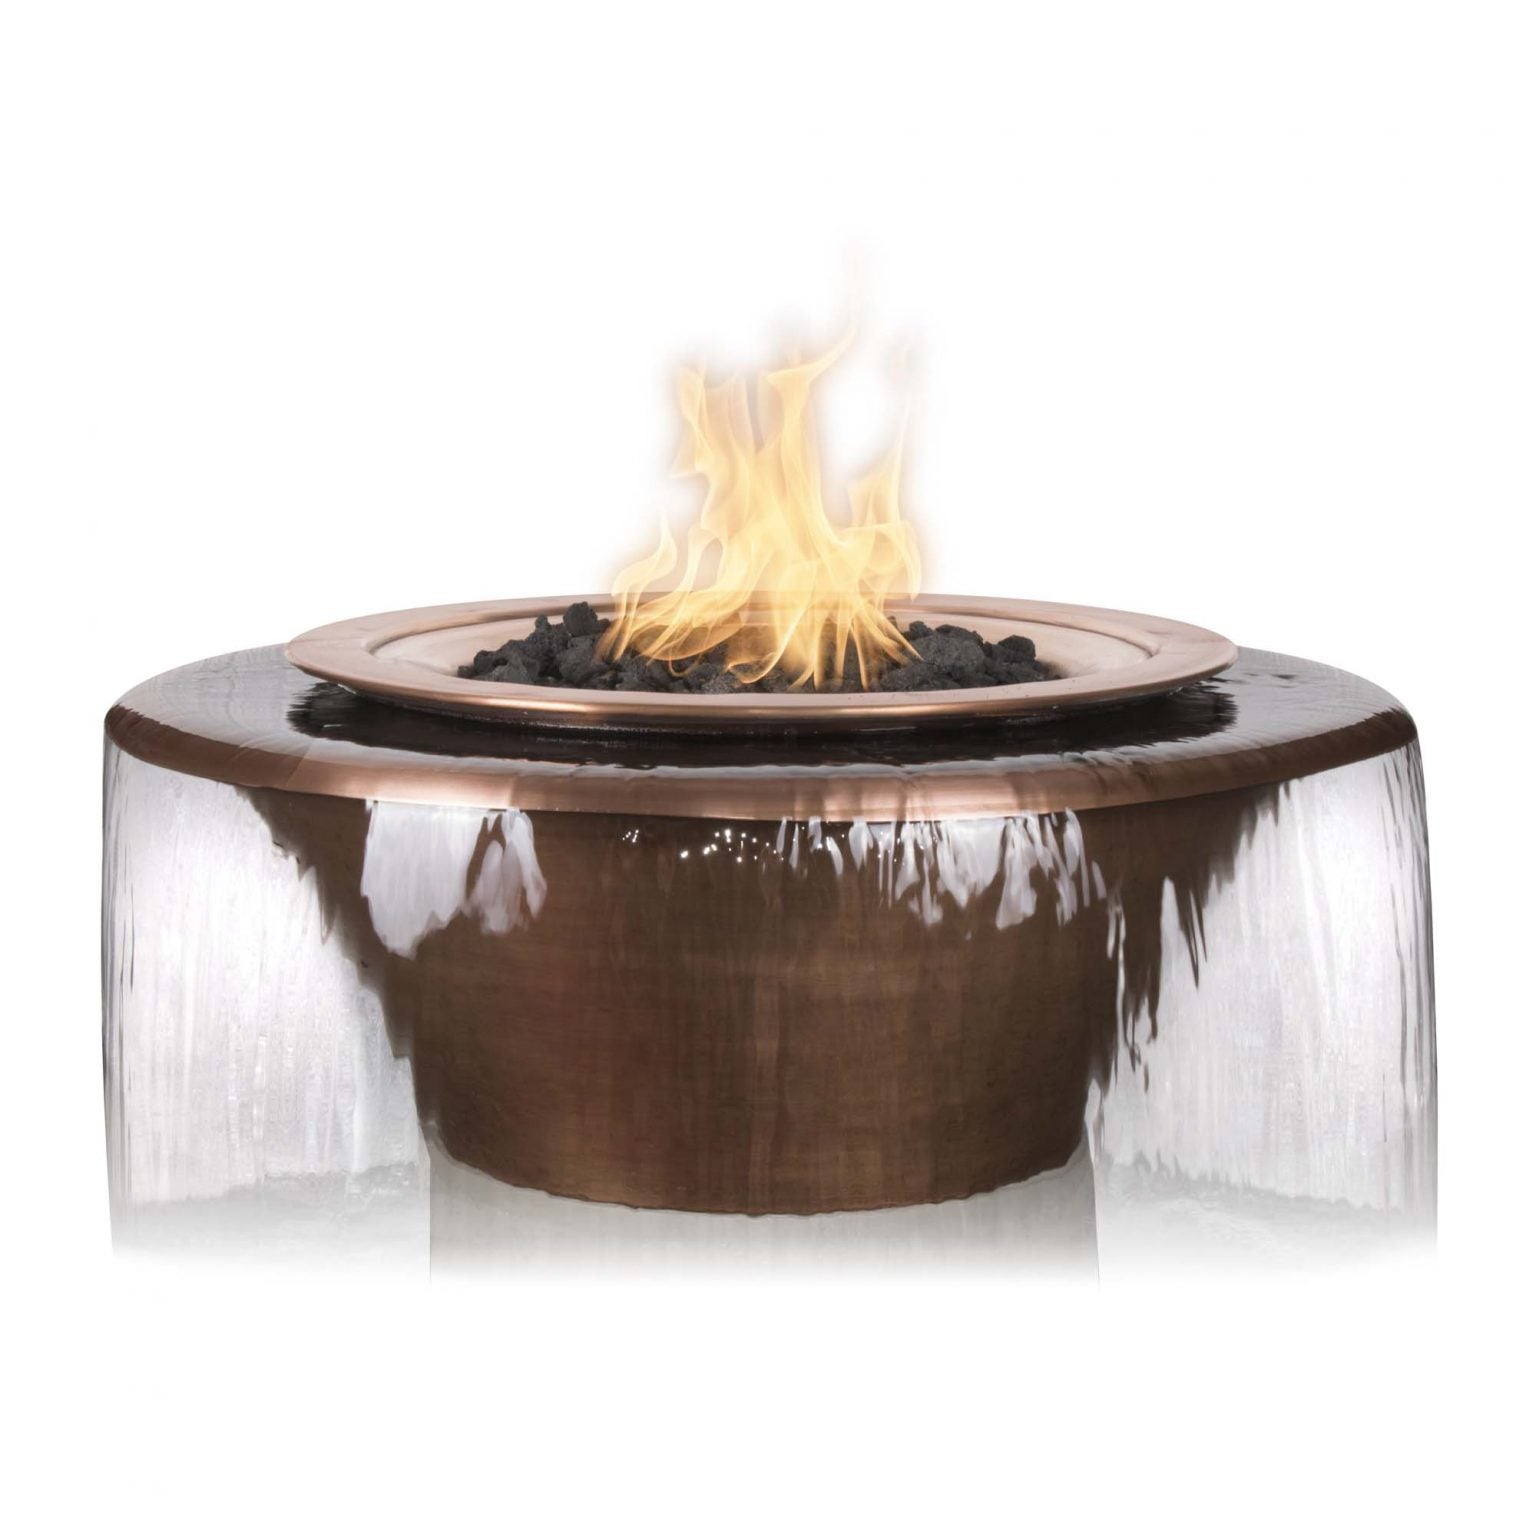 The Outdoor Plus Cazo Fire & Water Bowl 360° Spill | Hammered Patina Copper